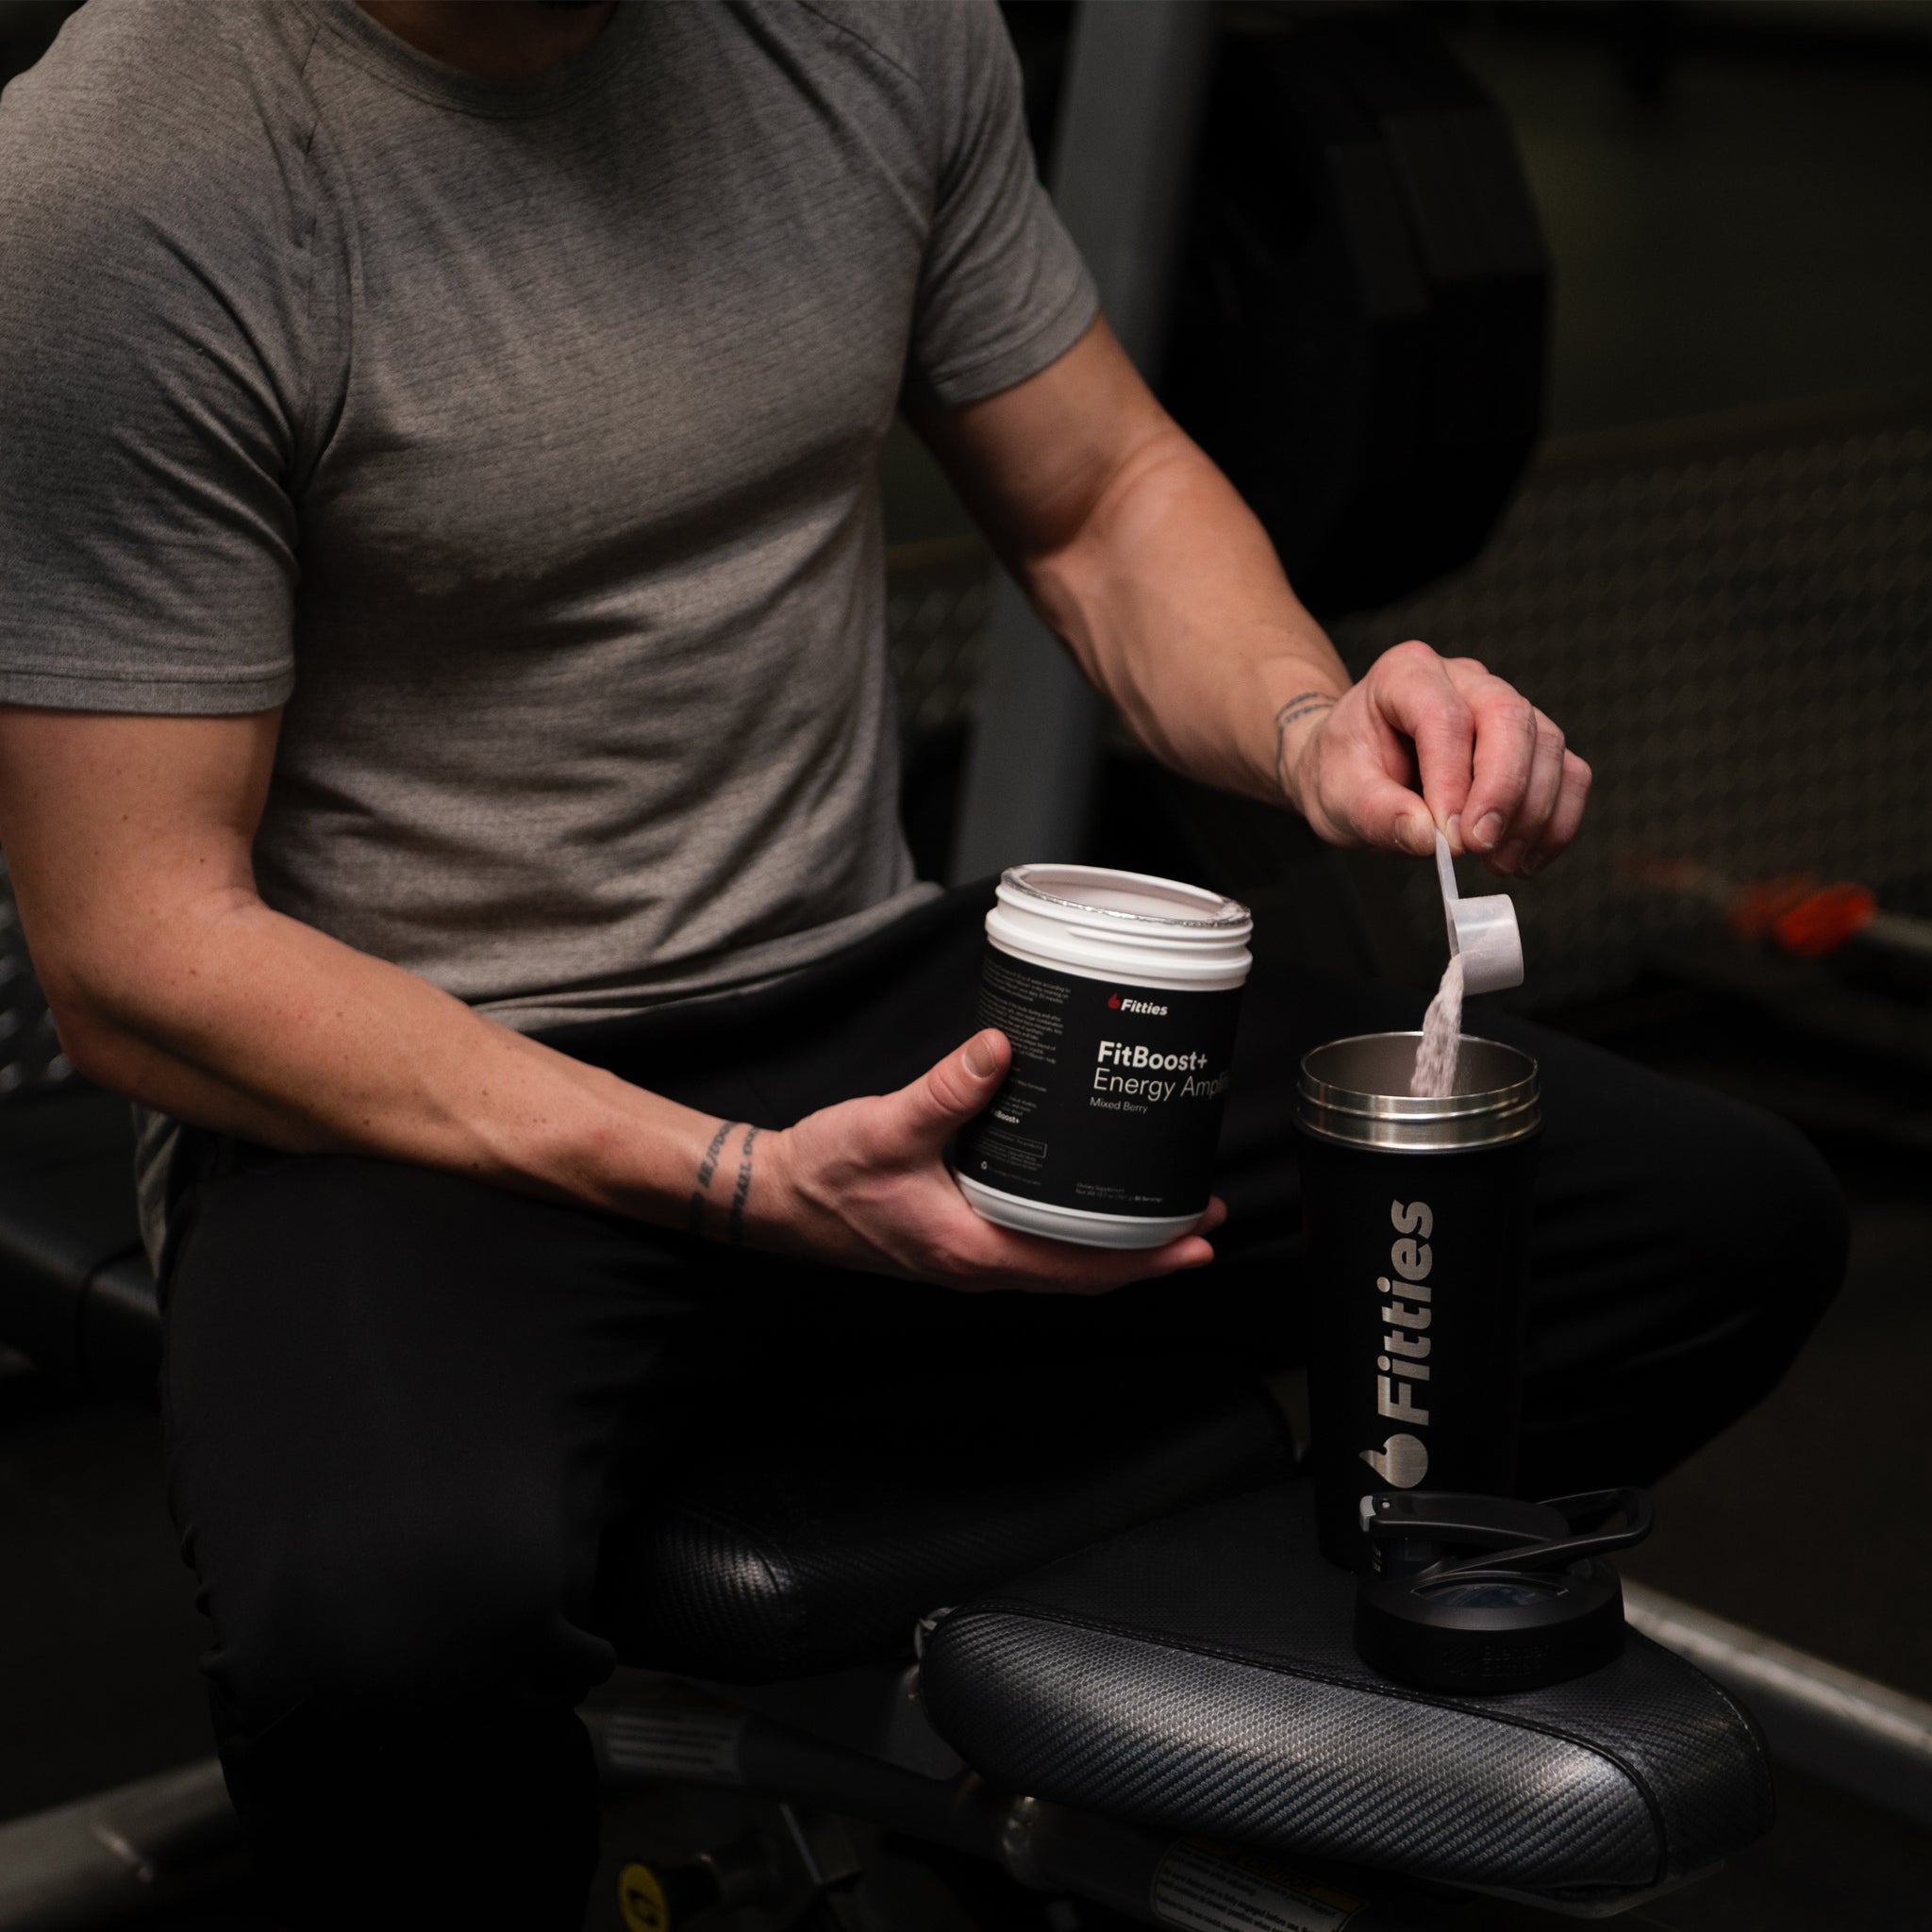 Fit male in gym pouring scoop of FitBoost+ into shaker